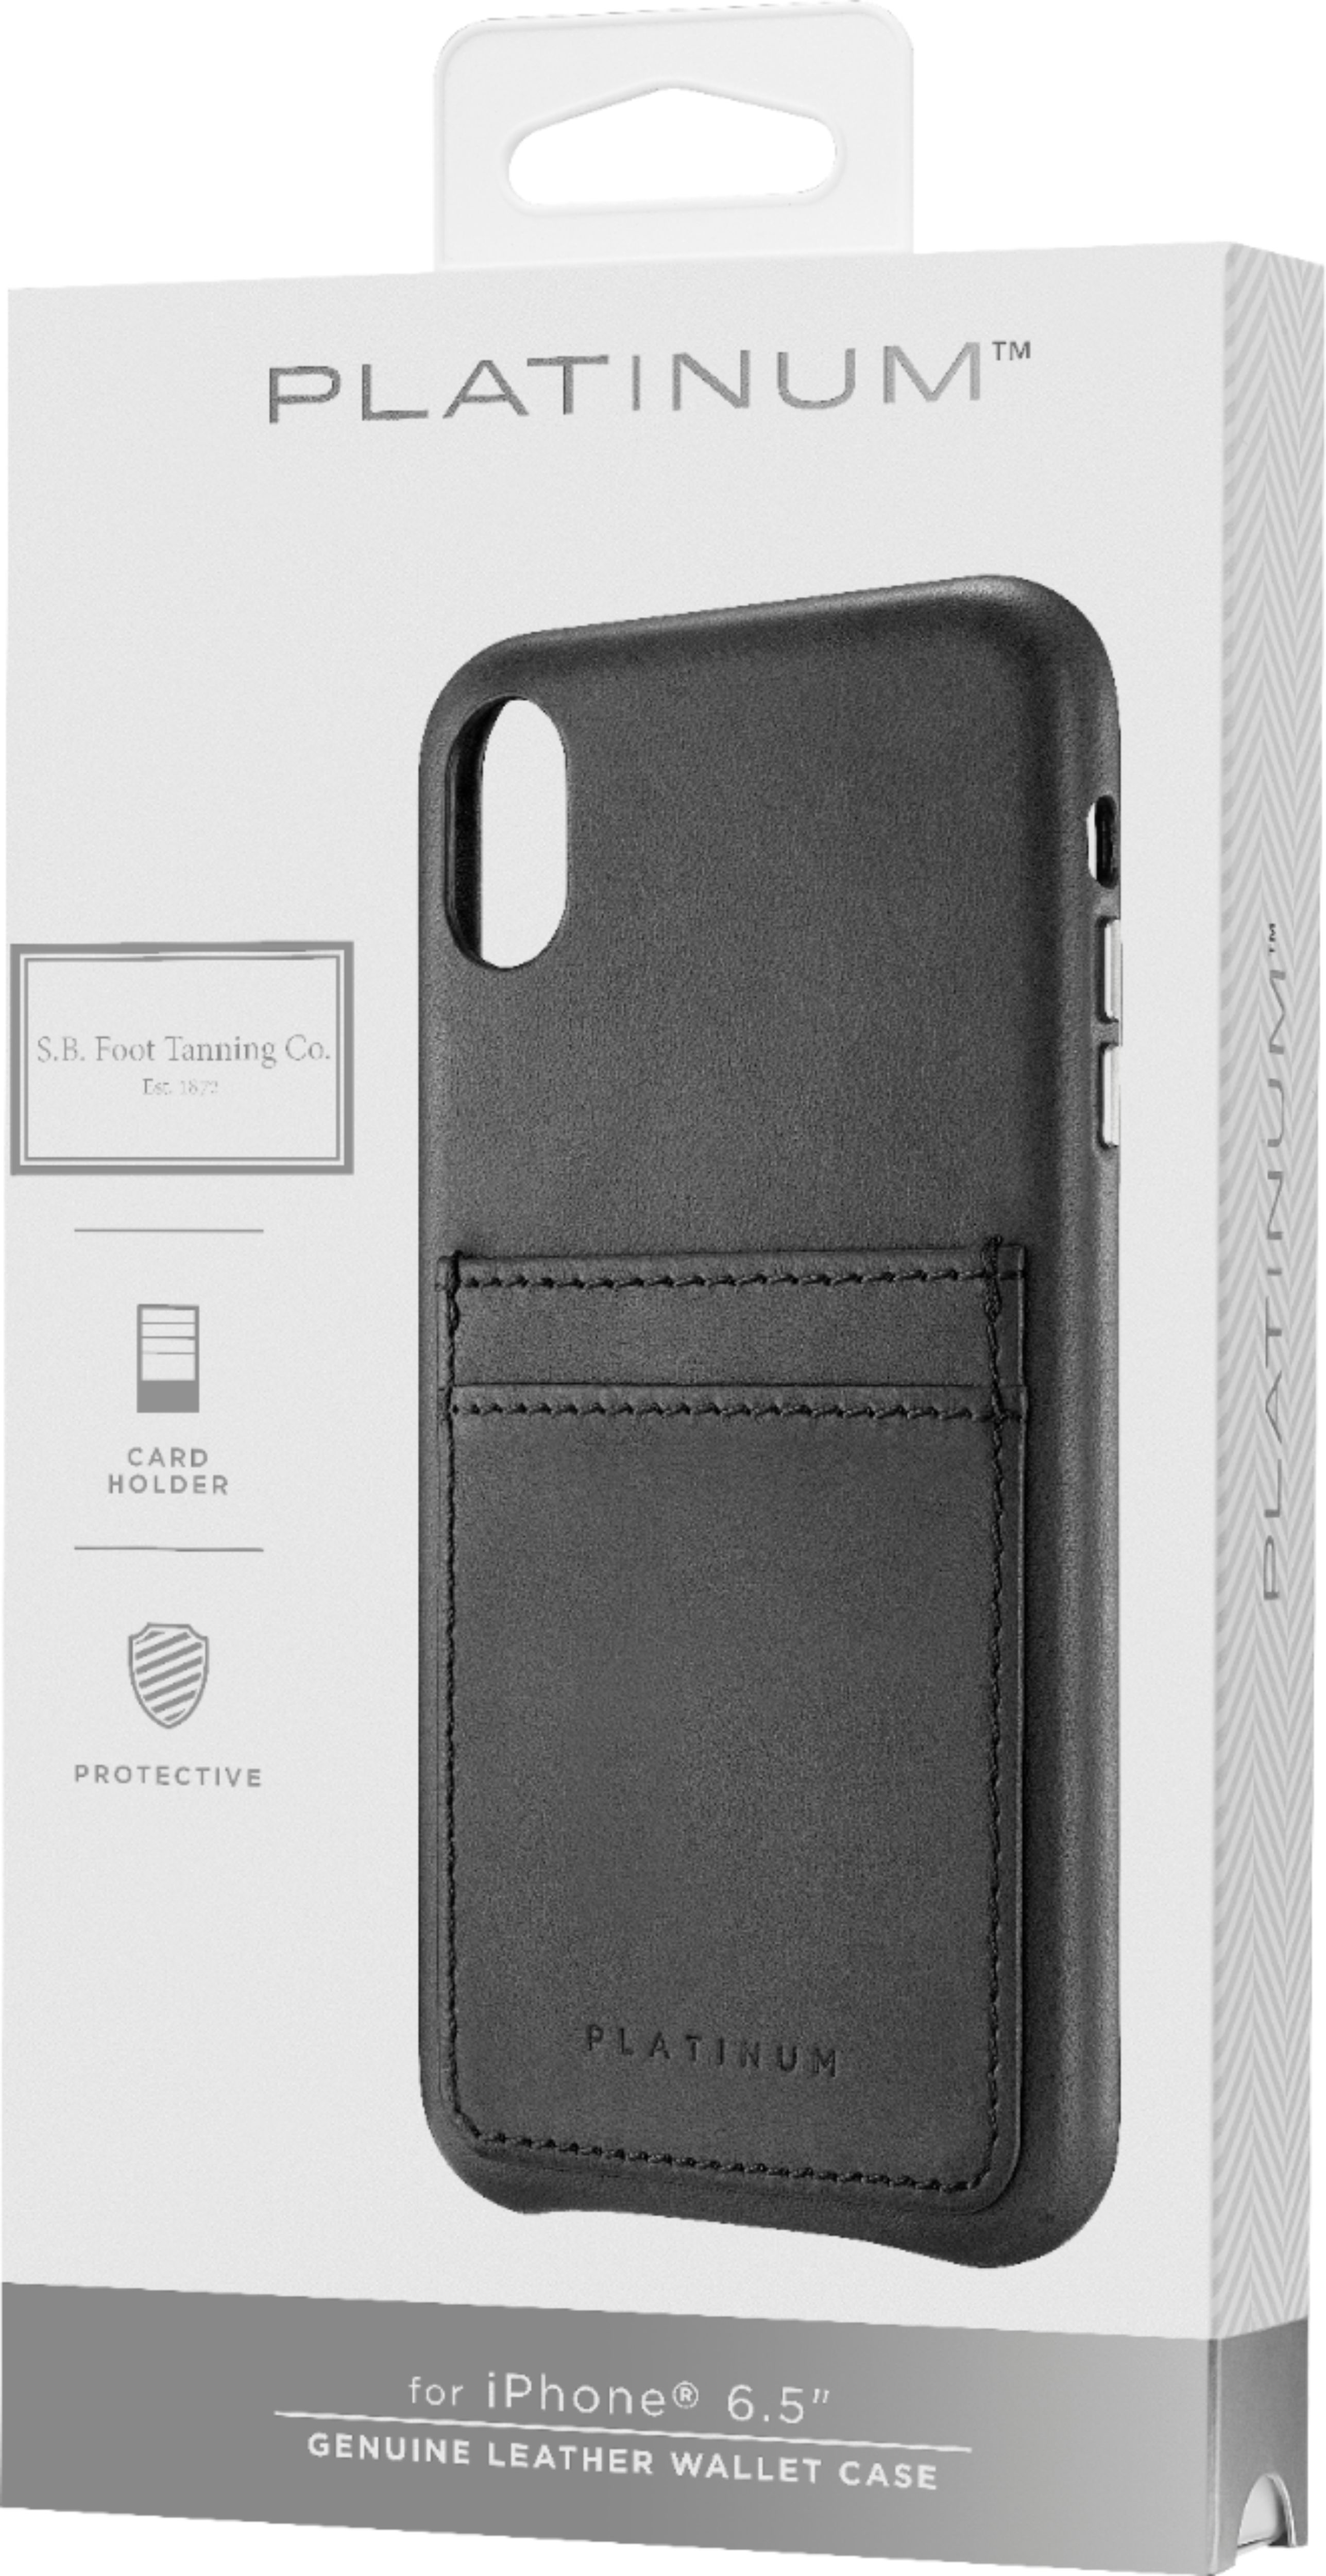 iPhone XS Max wallet cases you can buy right now